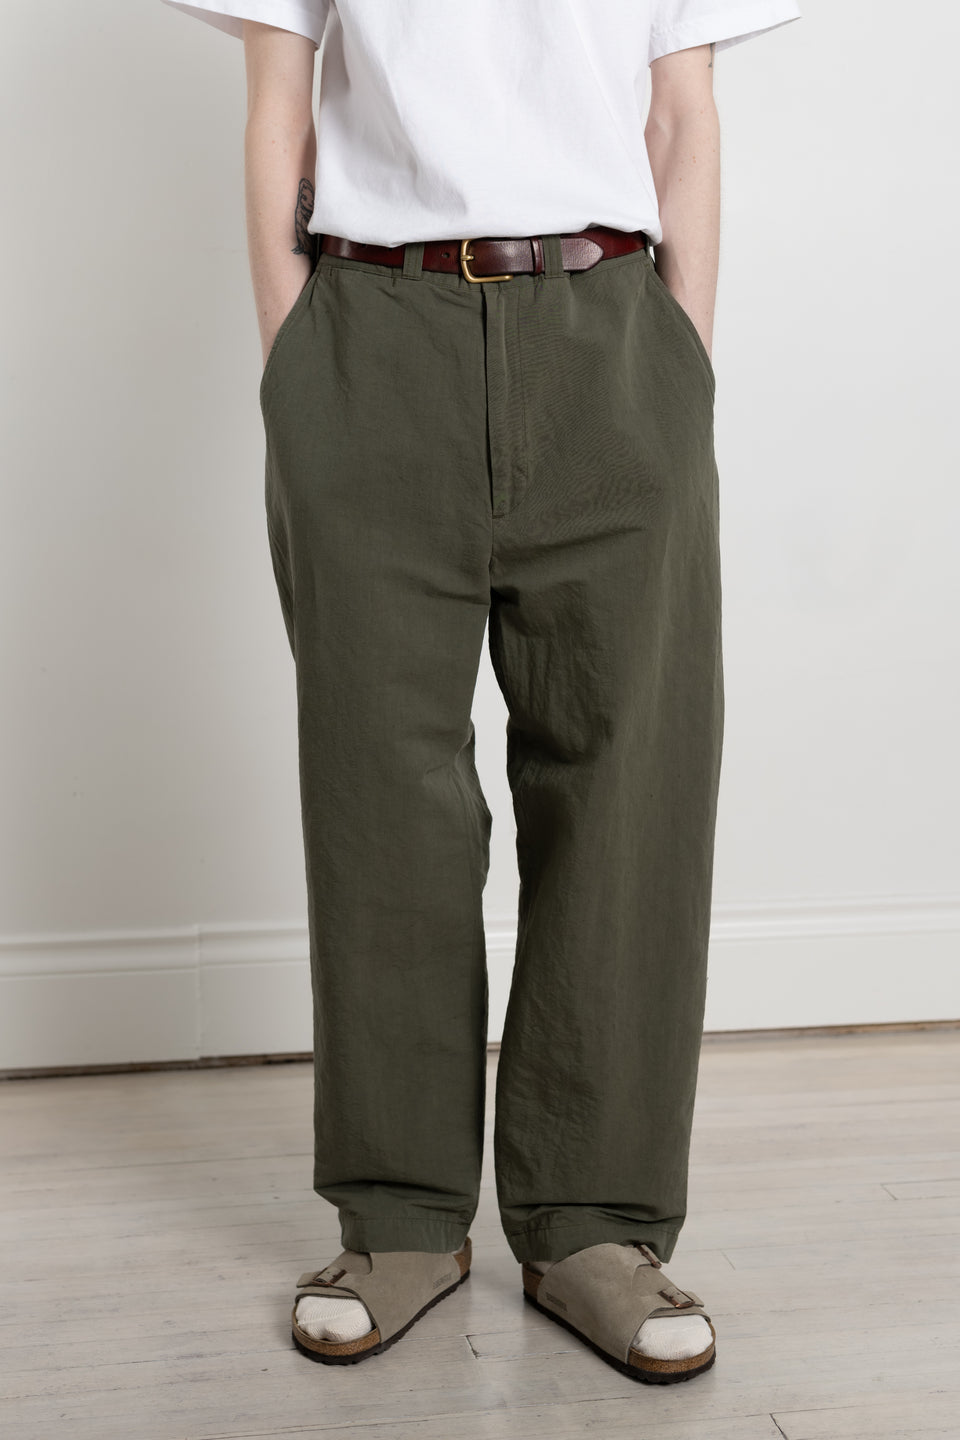 ENDS and MEANS spring summer 2024 SS24 24SS Men's Collection from Japan work chino green